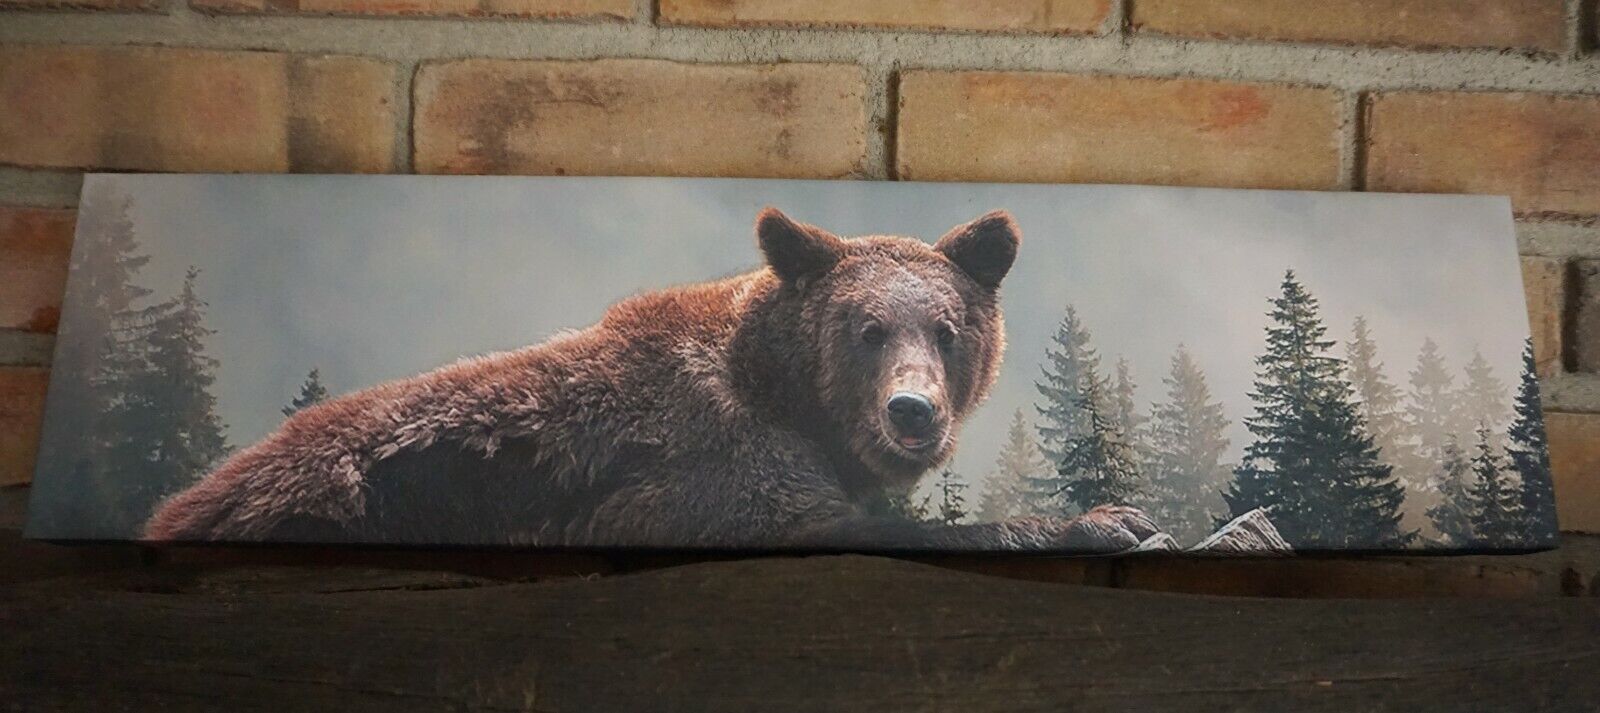 24" Grizzly Bear Sign Rustic Log Cabin Mountain Lodge Primitive Home Decor NEW